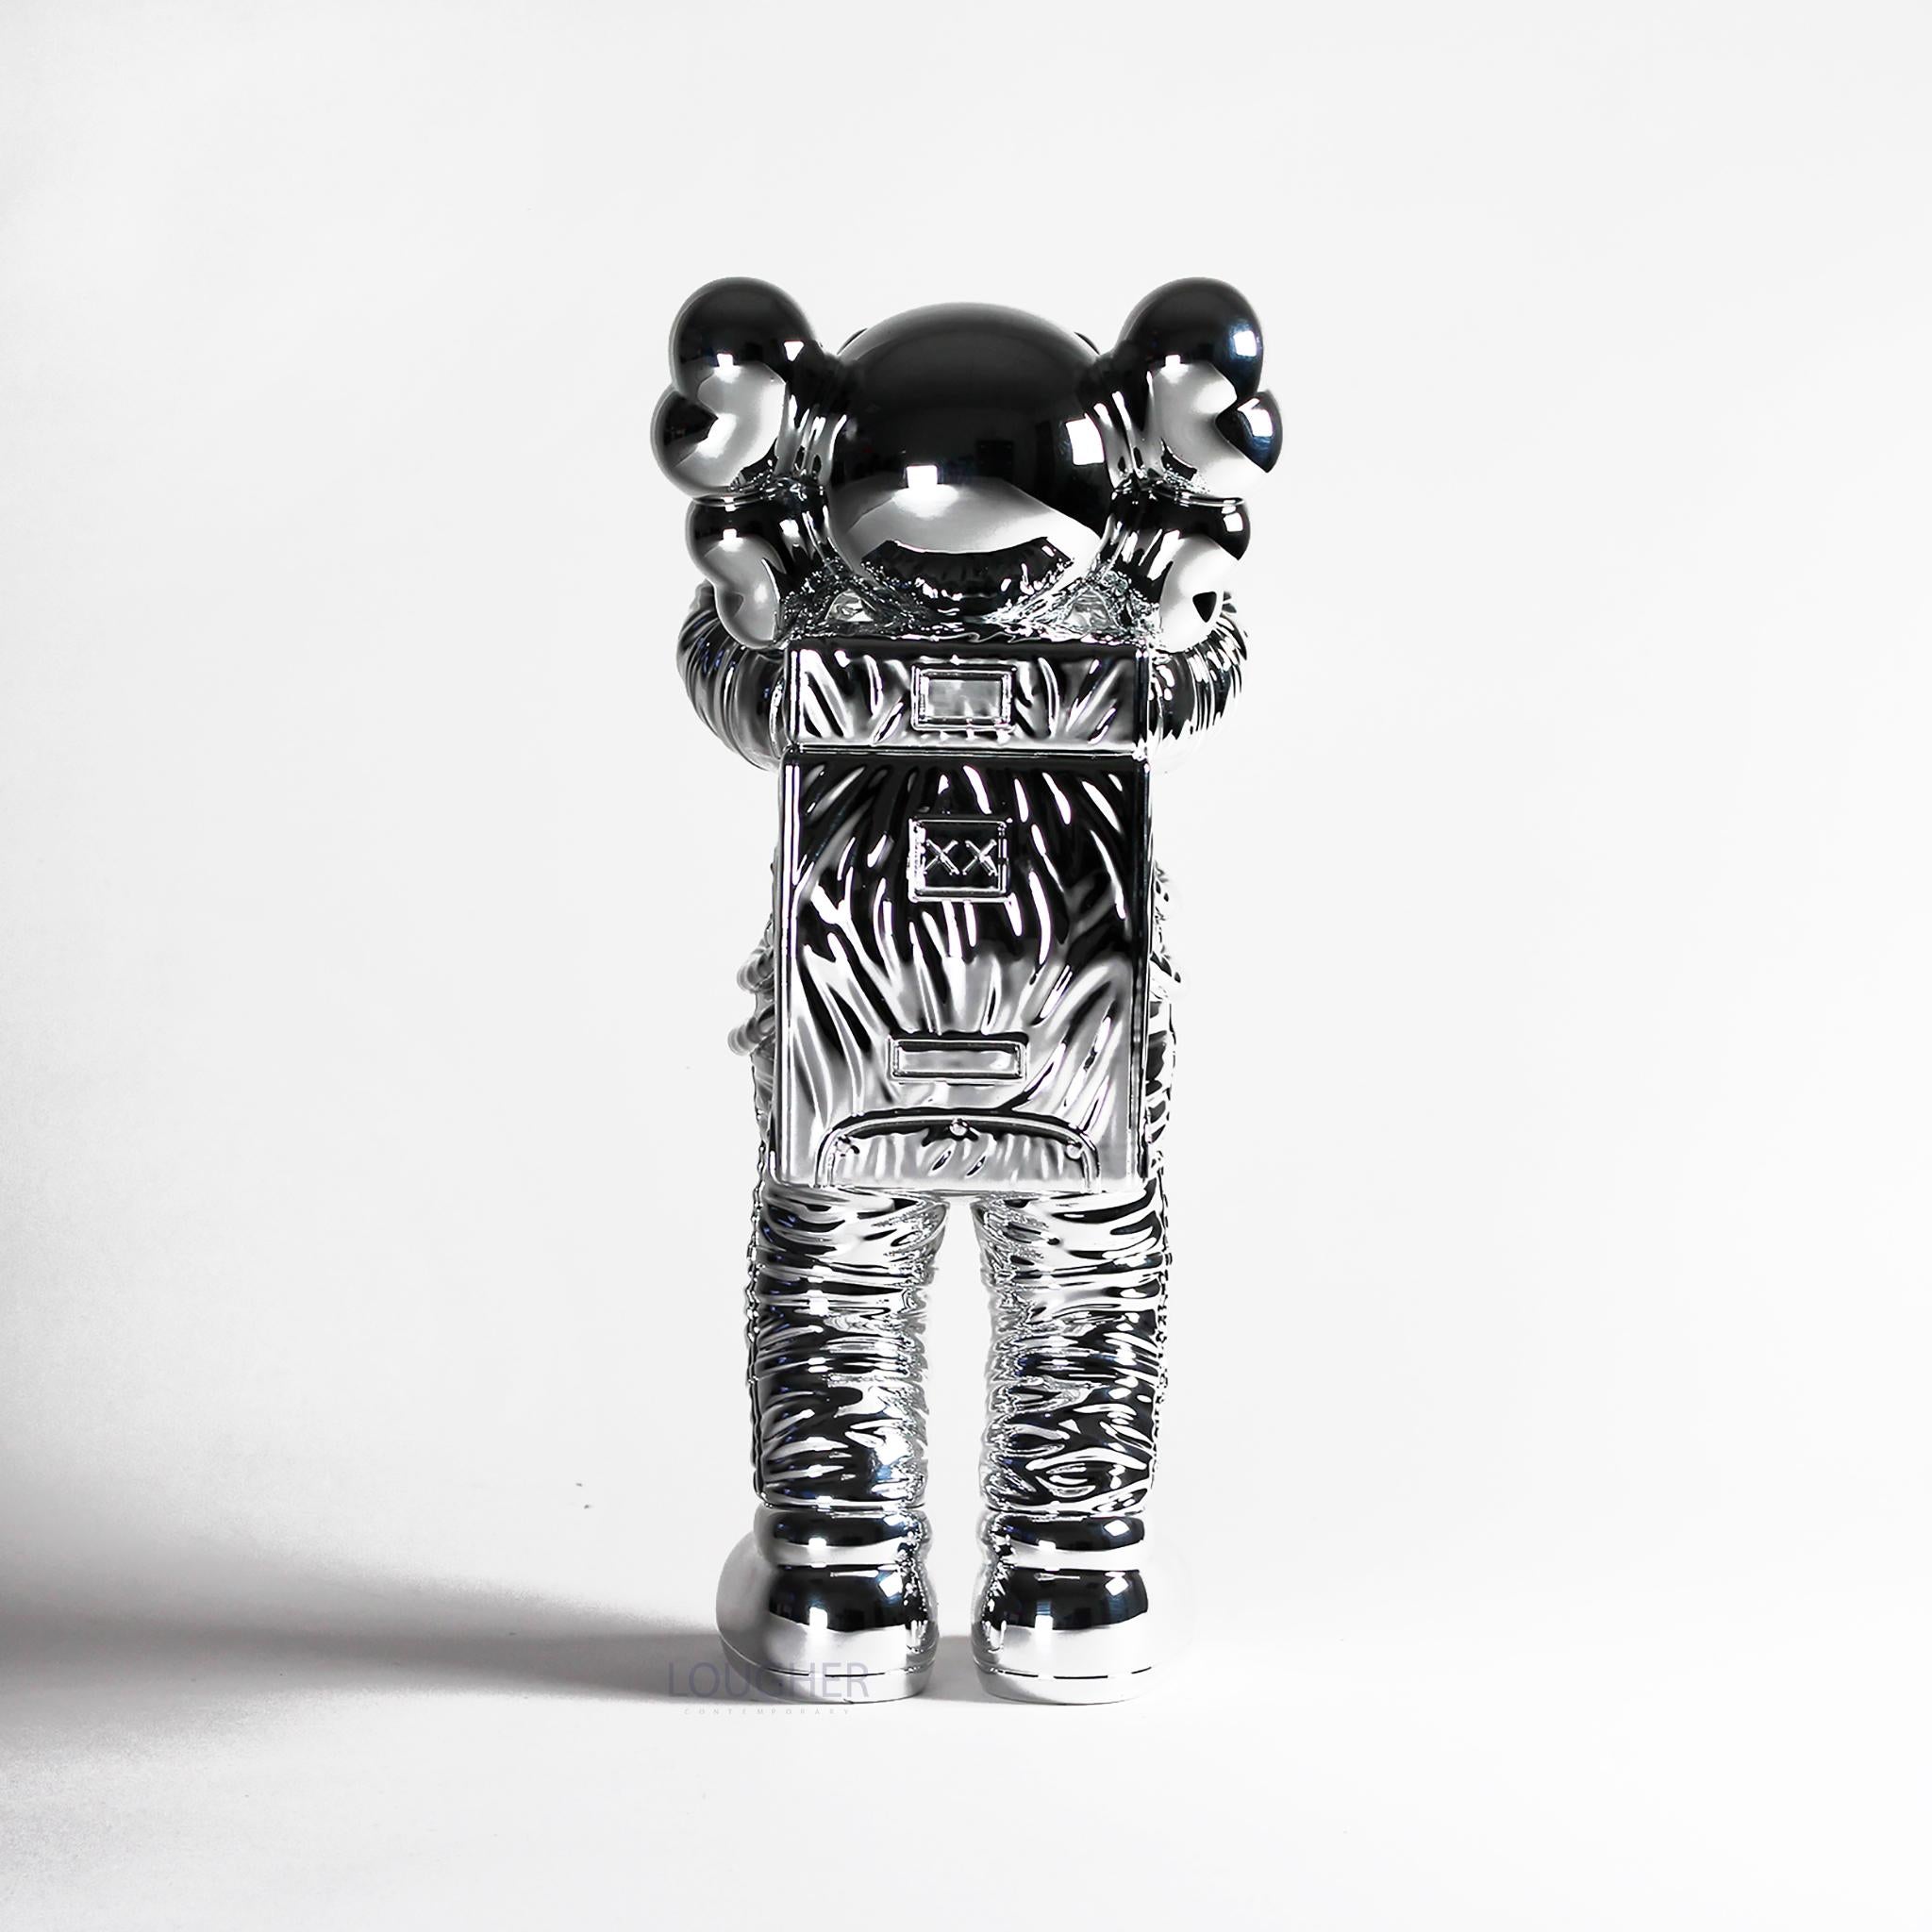 Holiday Space (Silver) - Sculpture by KAWS